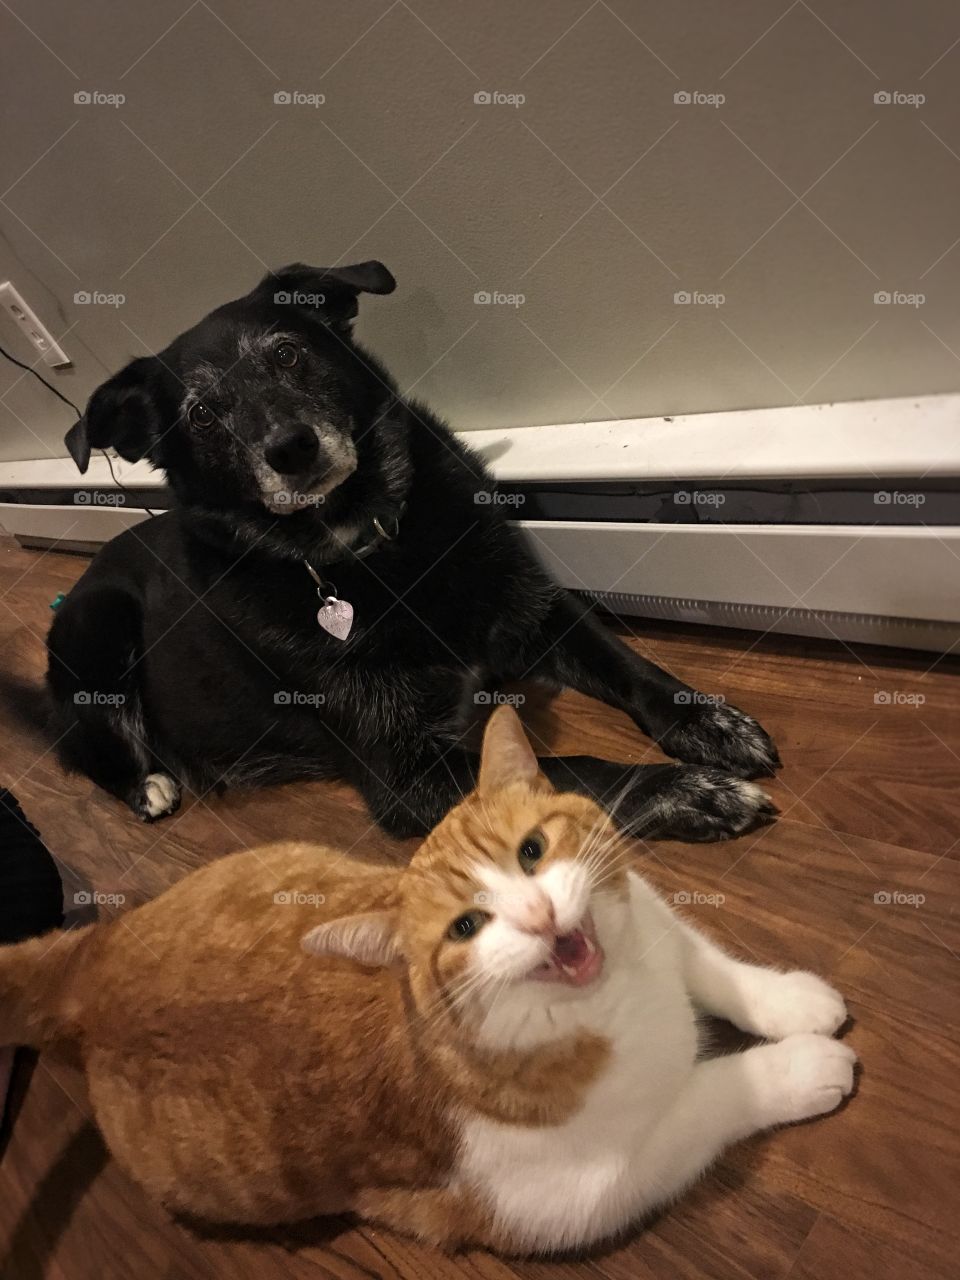 Cat and dog scheming how to effectively beg for more treats 